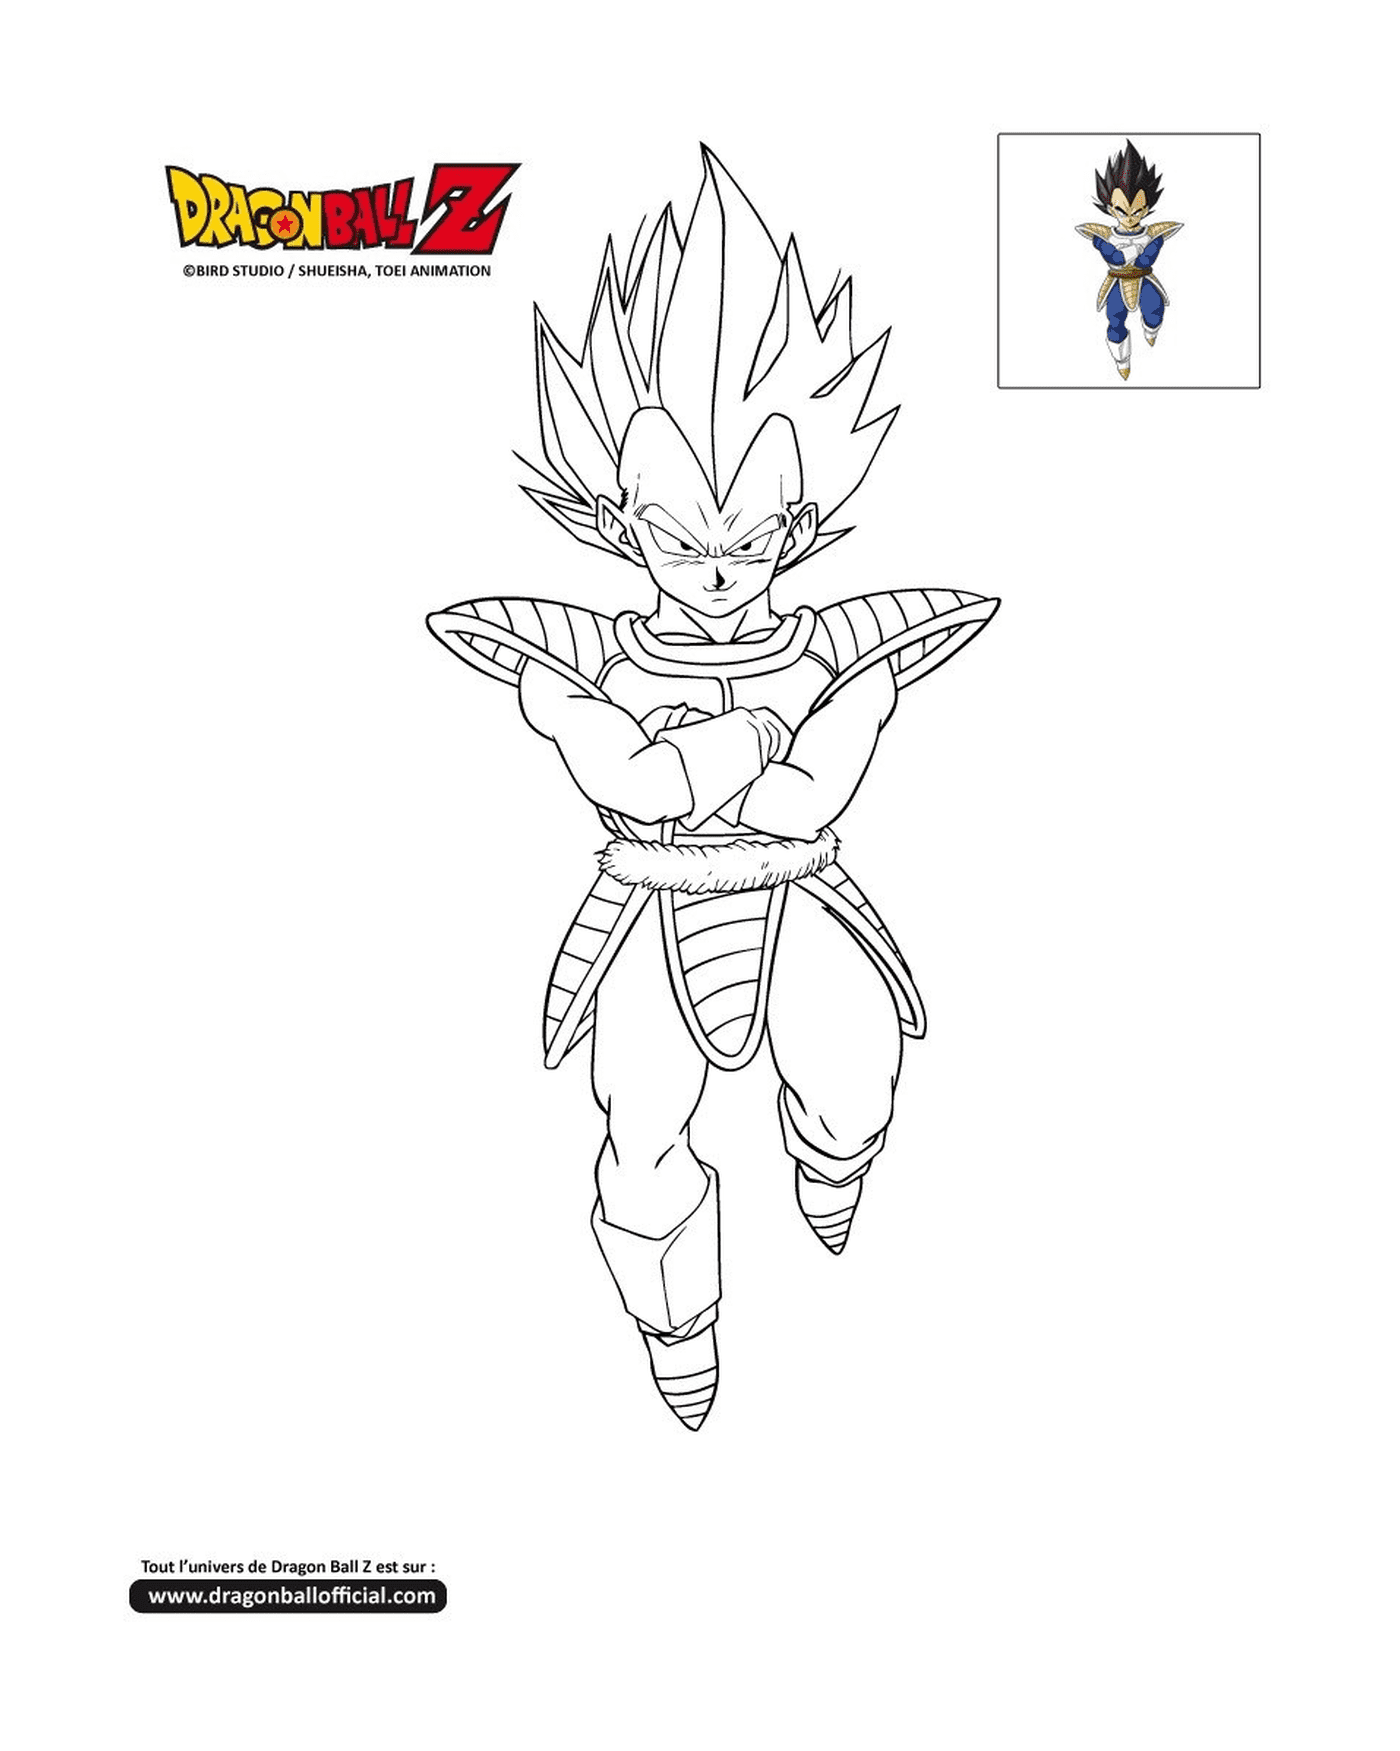  Vegeta, a character from Dragon Ball Z 